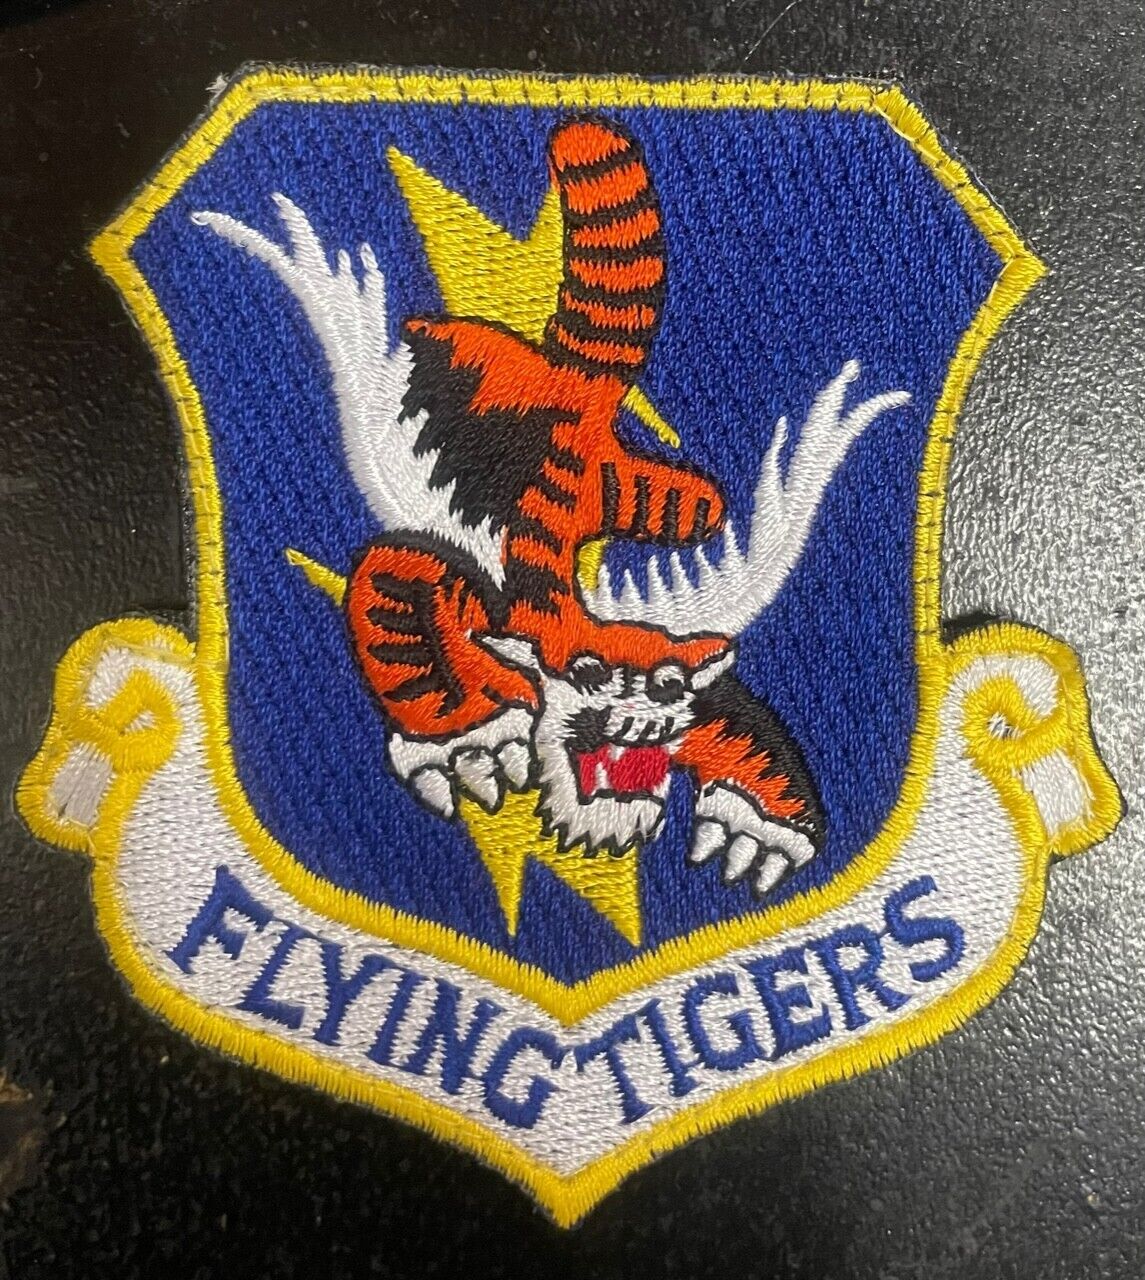 Embroidered Flying Tigers Patch, Modern Original USAF Hook and Pile